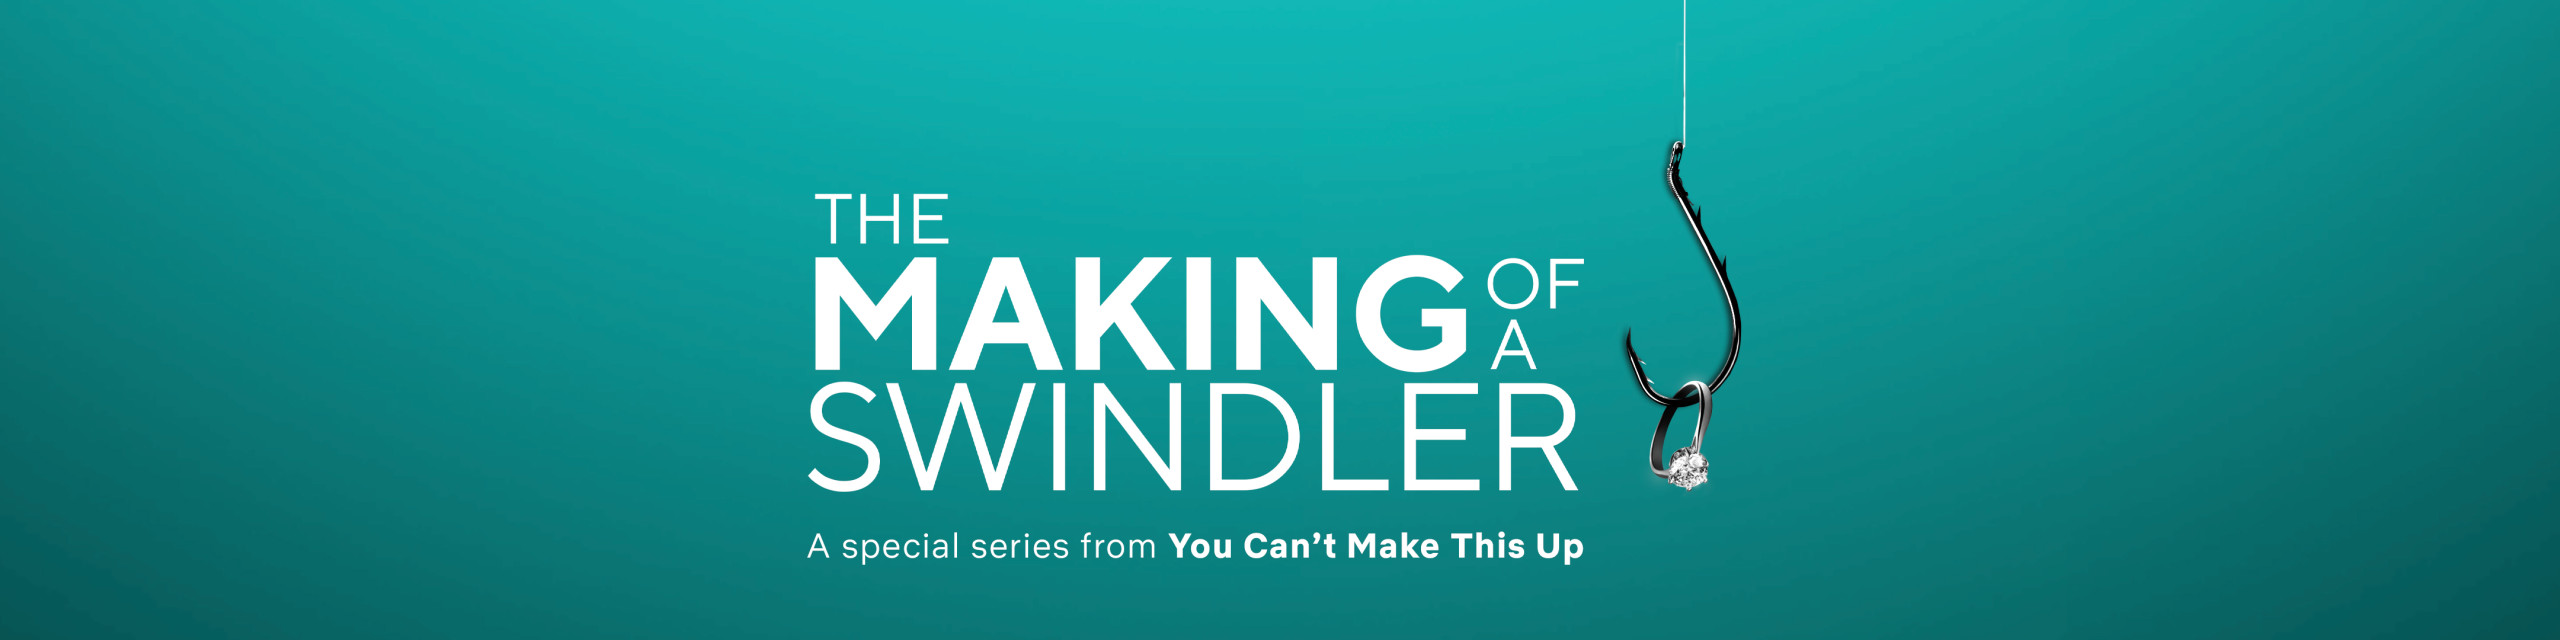 The Making of a Swindler: A special three-part podcast companion to 'The Tinder Swindler'